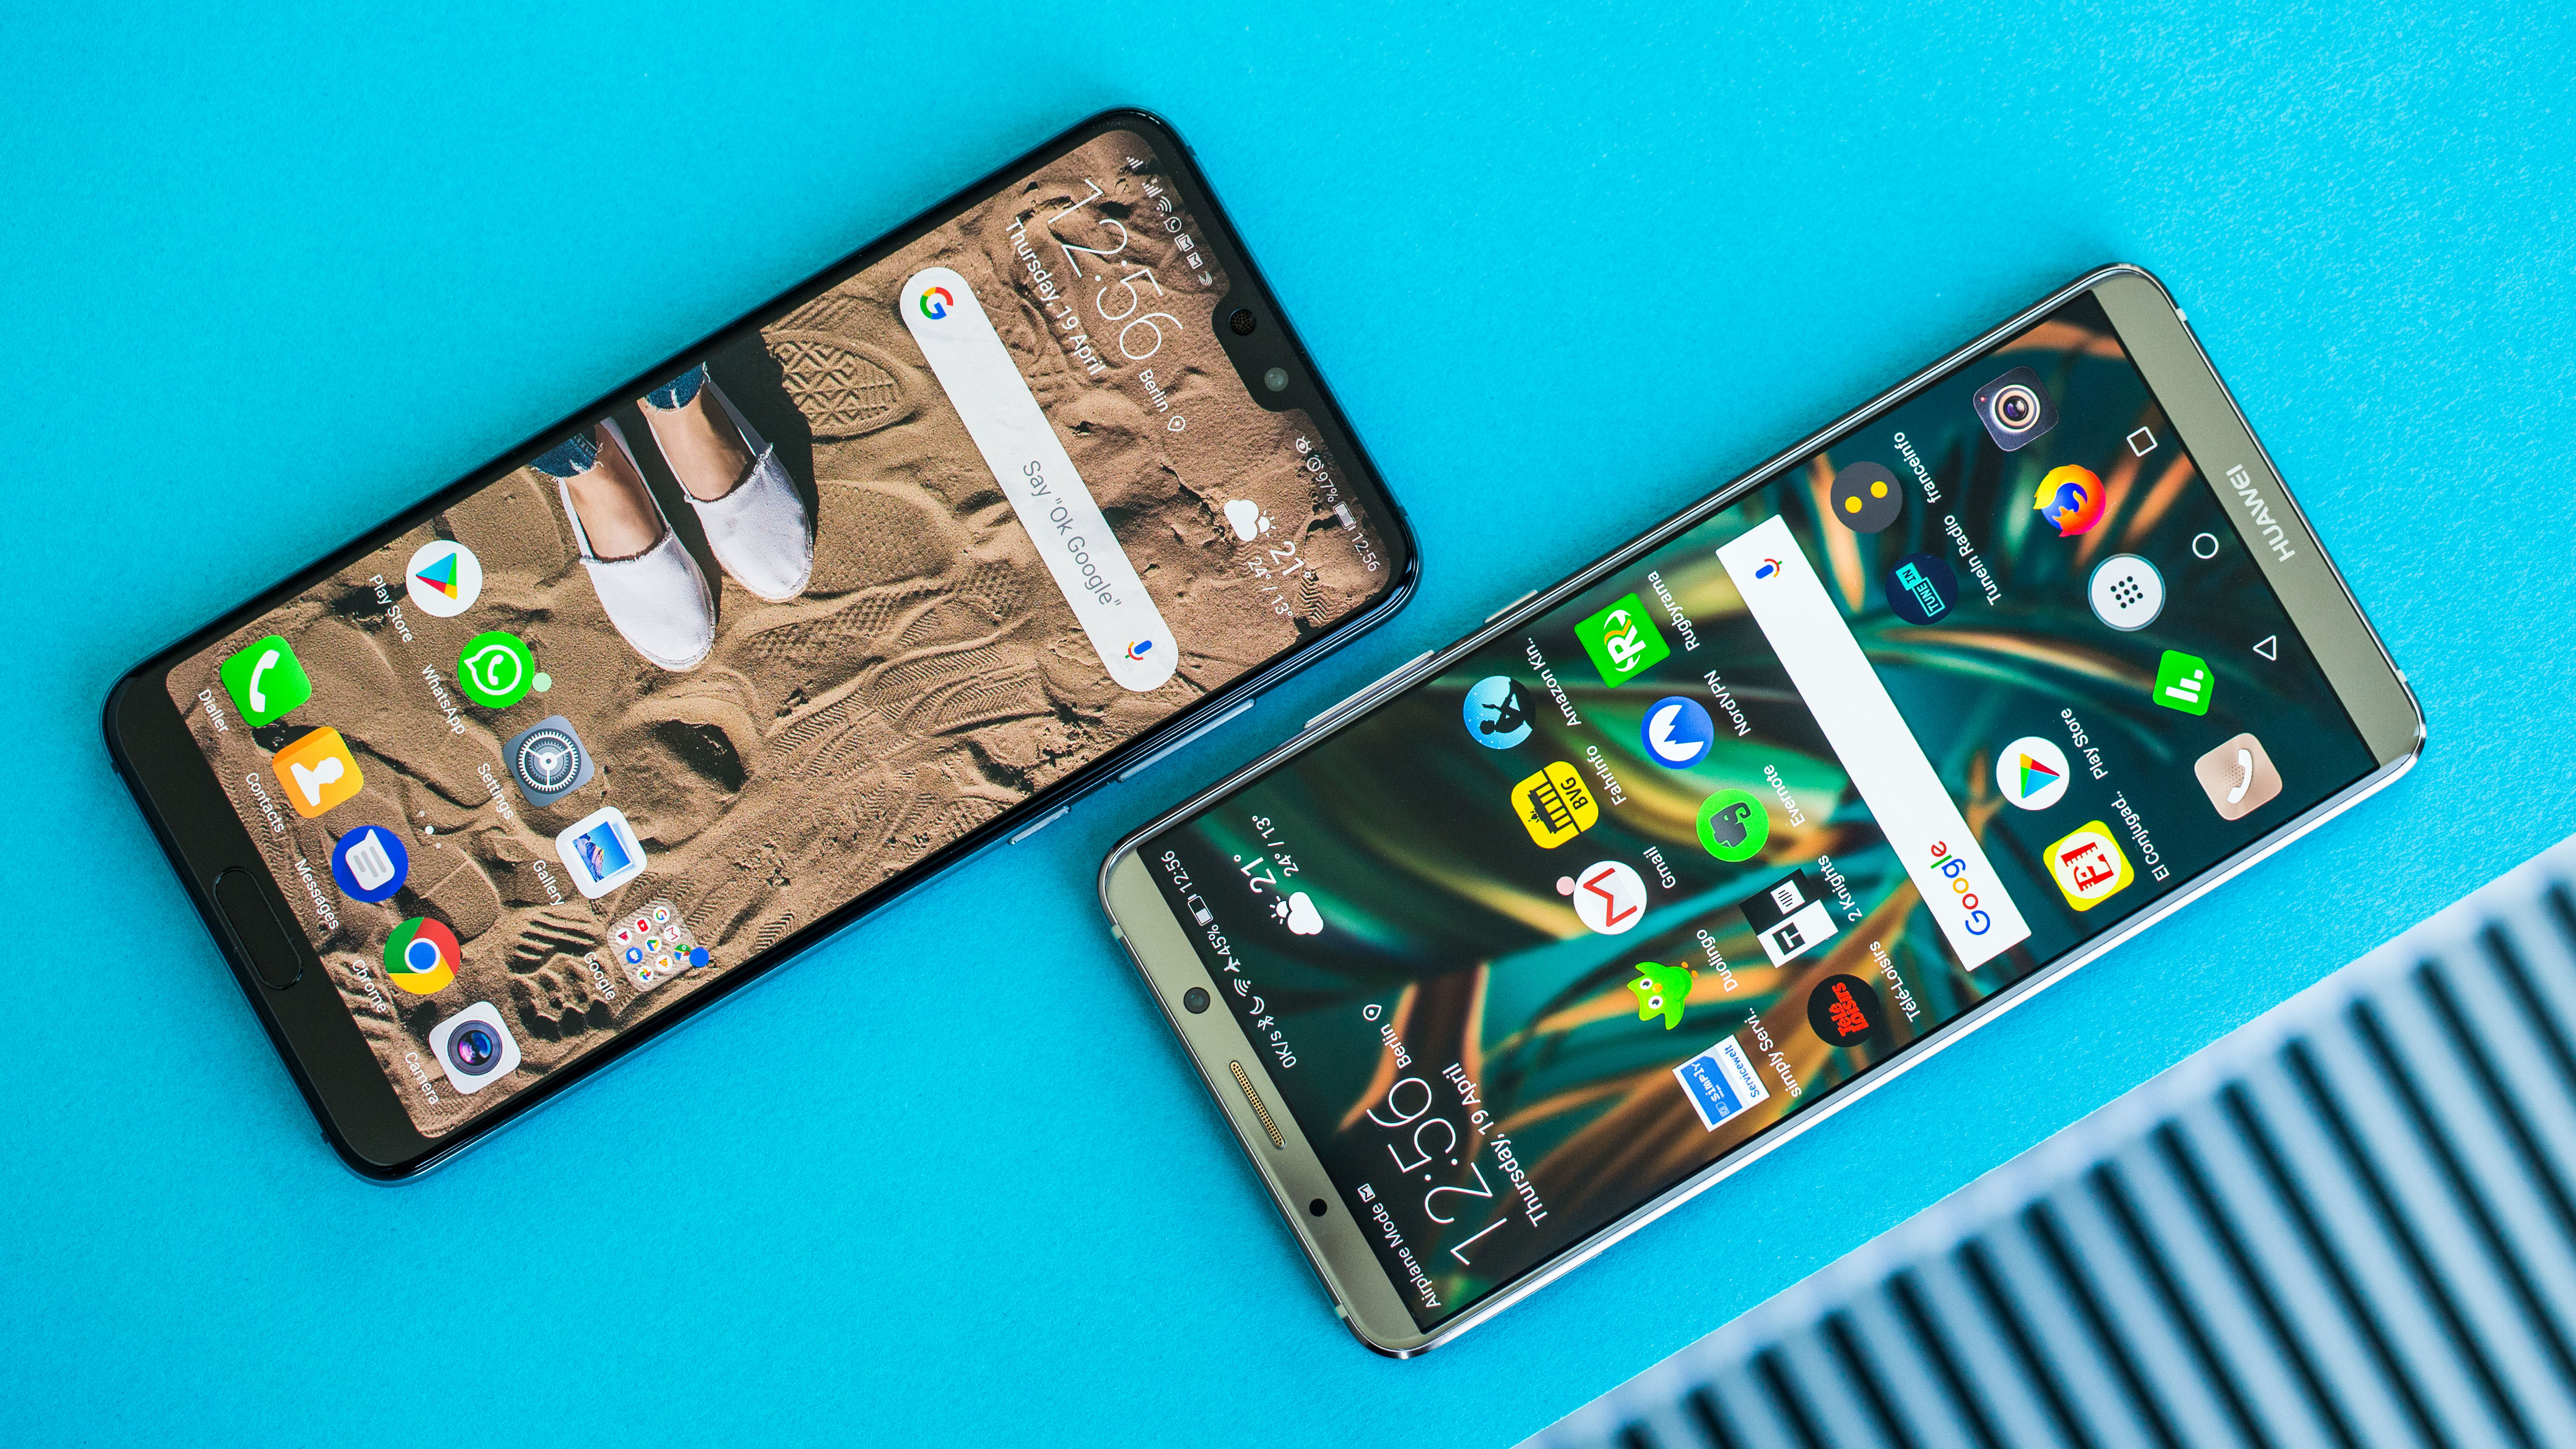 galop verkenner timmerman P20 Pro vs Mate 10 Pro: who's the real head of the Huawei family? | NextPit